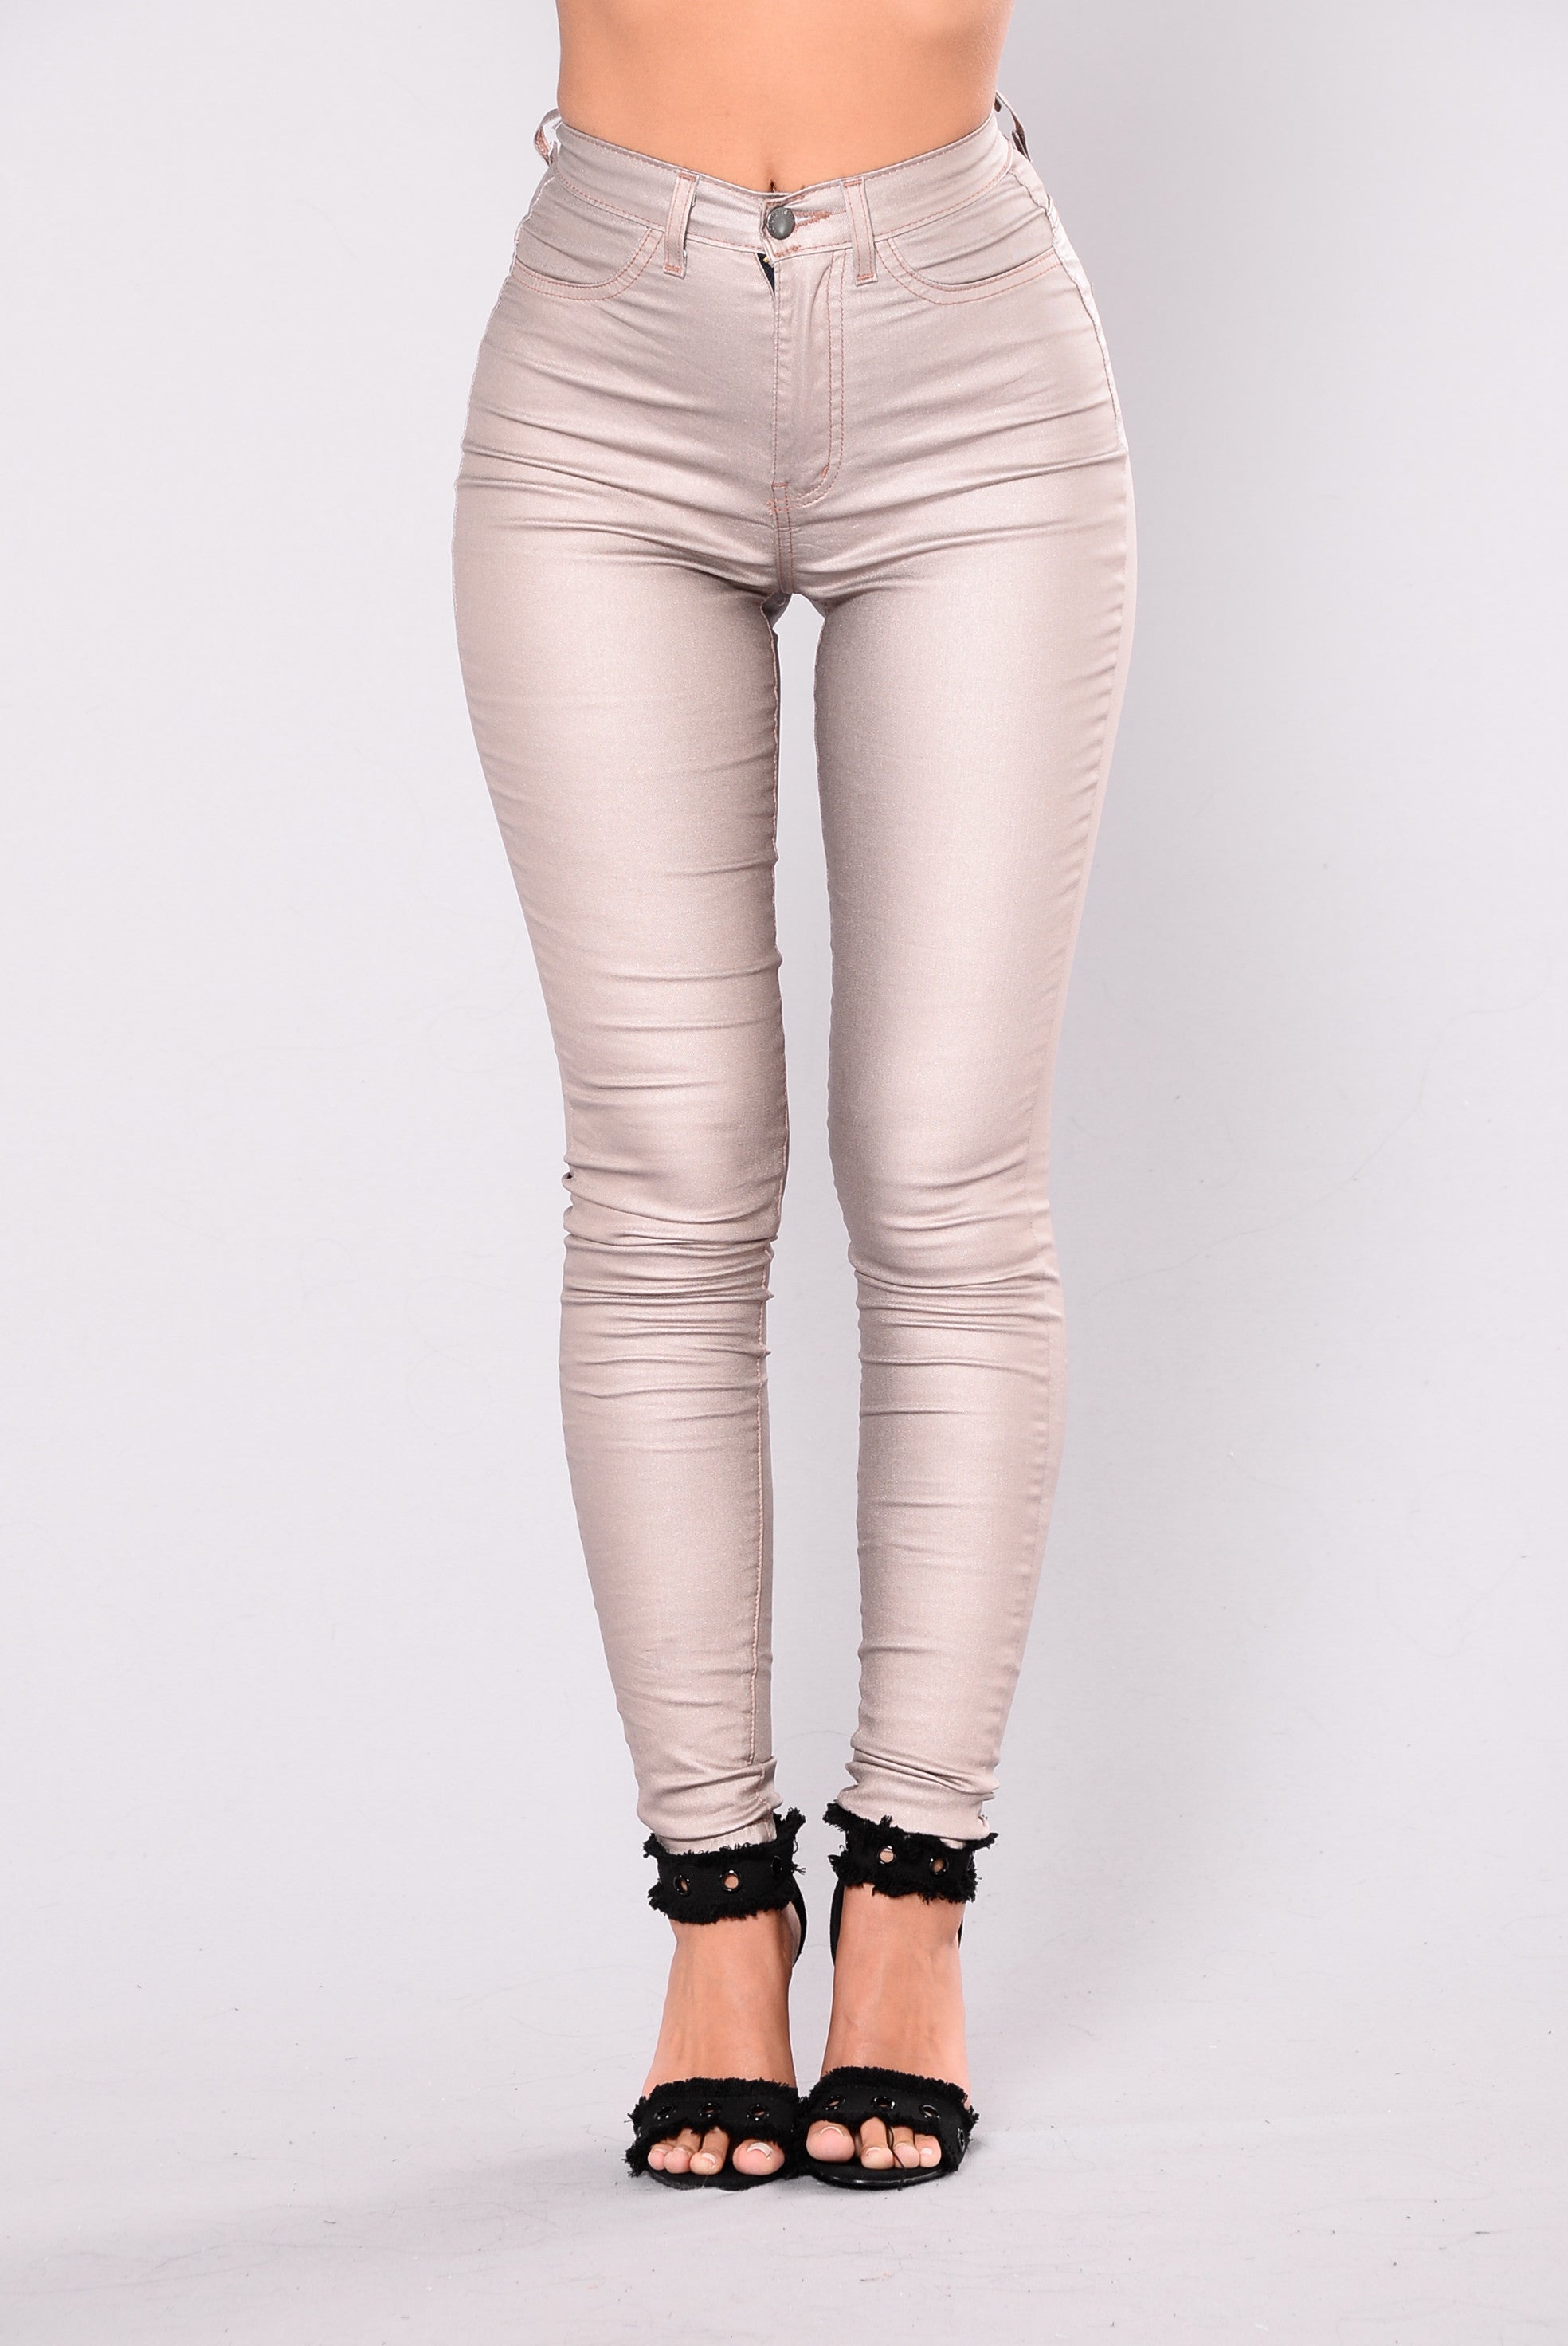 It's So You Jeans - Rose Gold